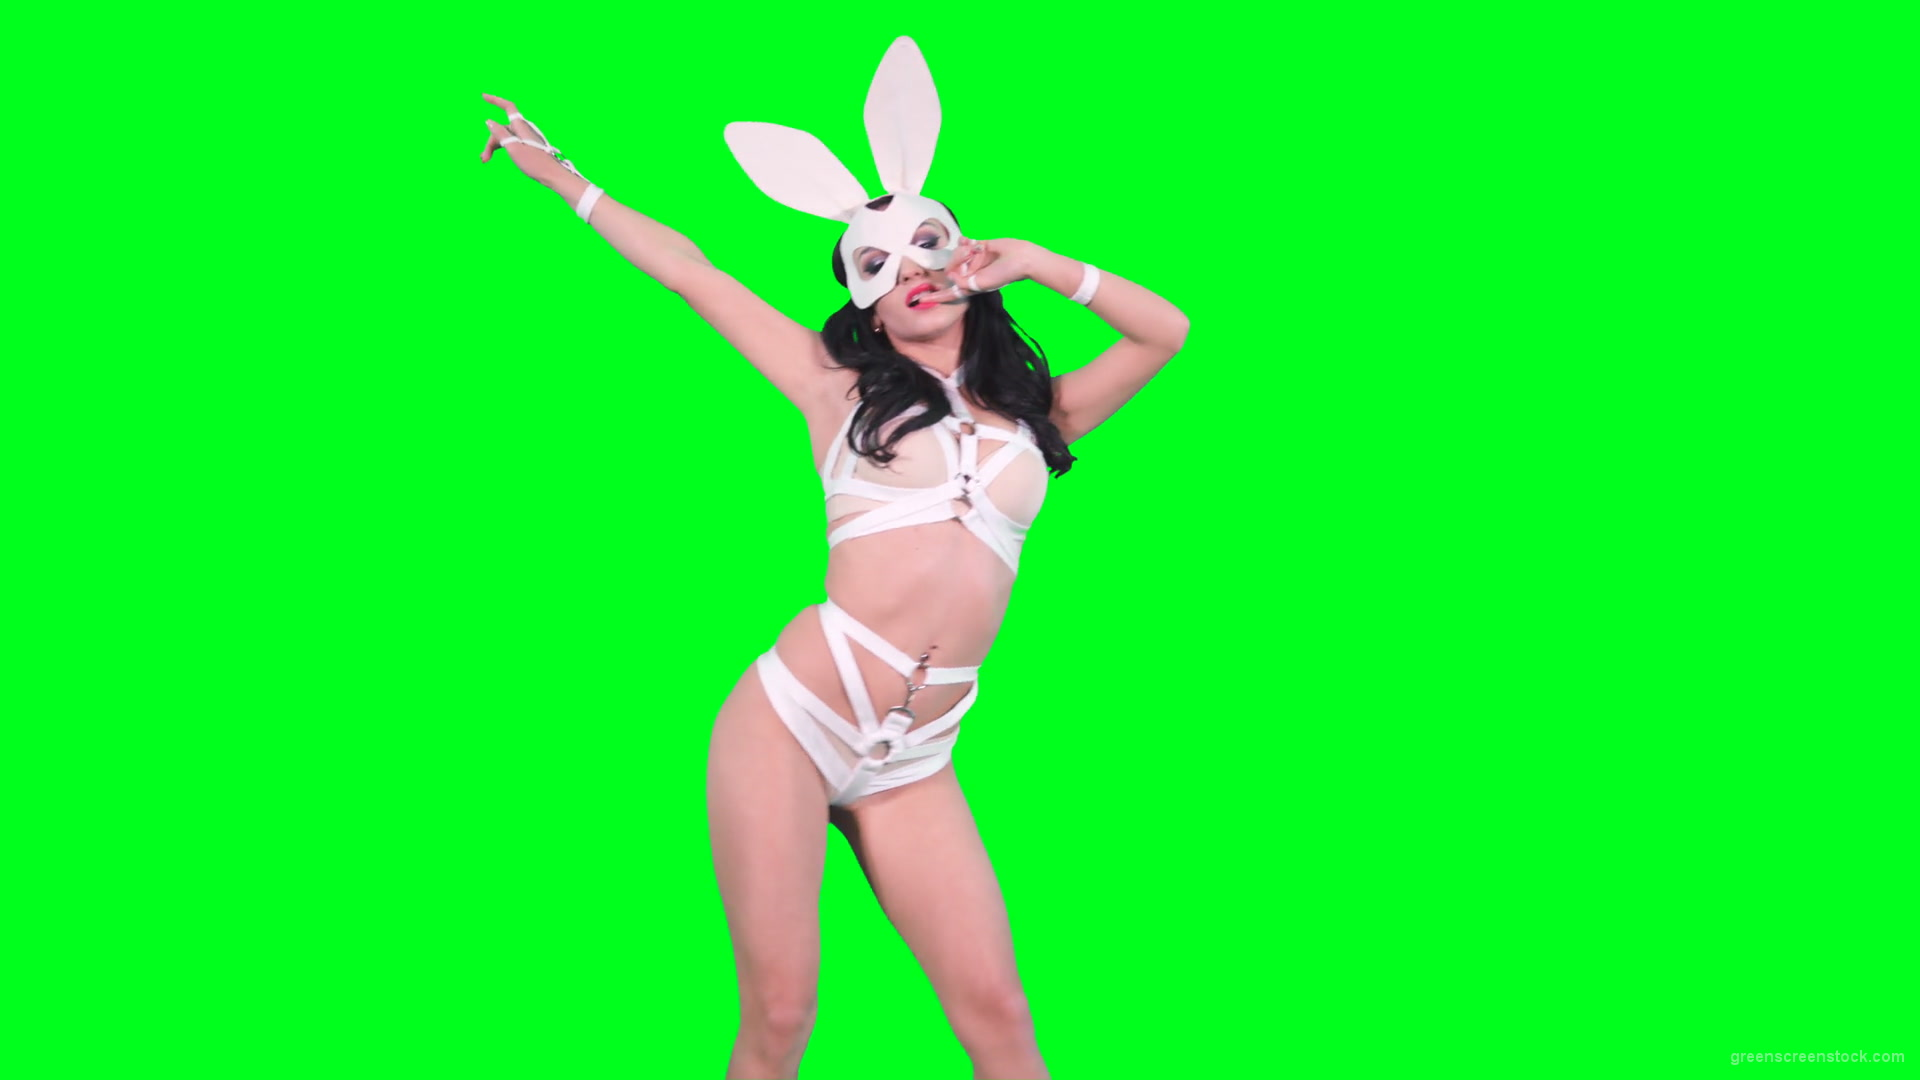 Sexy-bunny-girl-in-rabbit-costume-on-green-screen-4K-Video-Footage-1920_005 Green Screen Stock